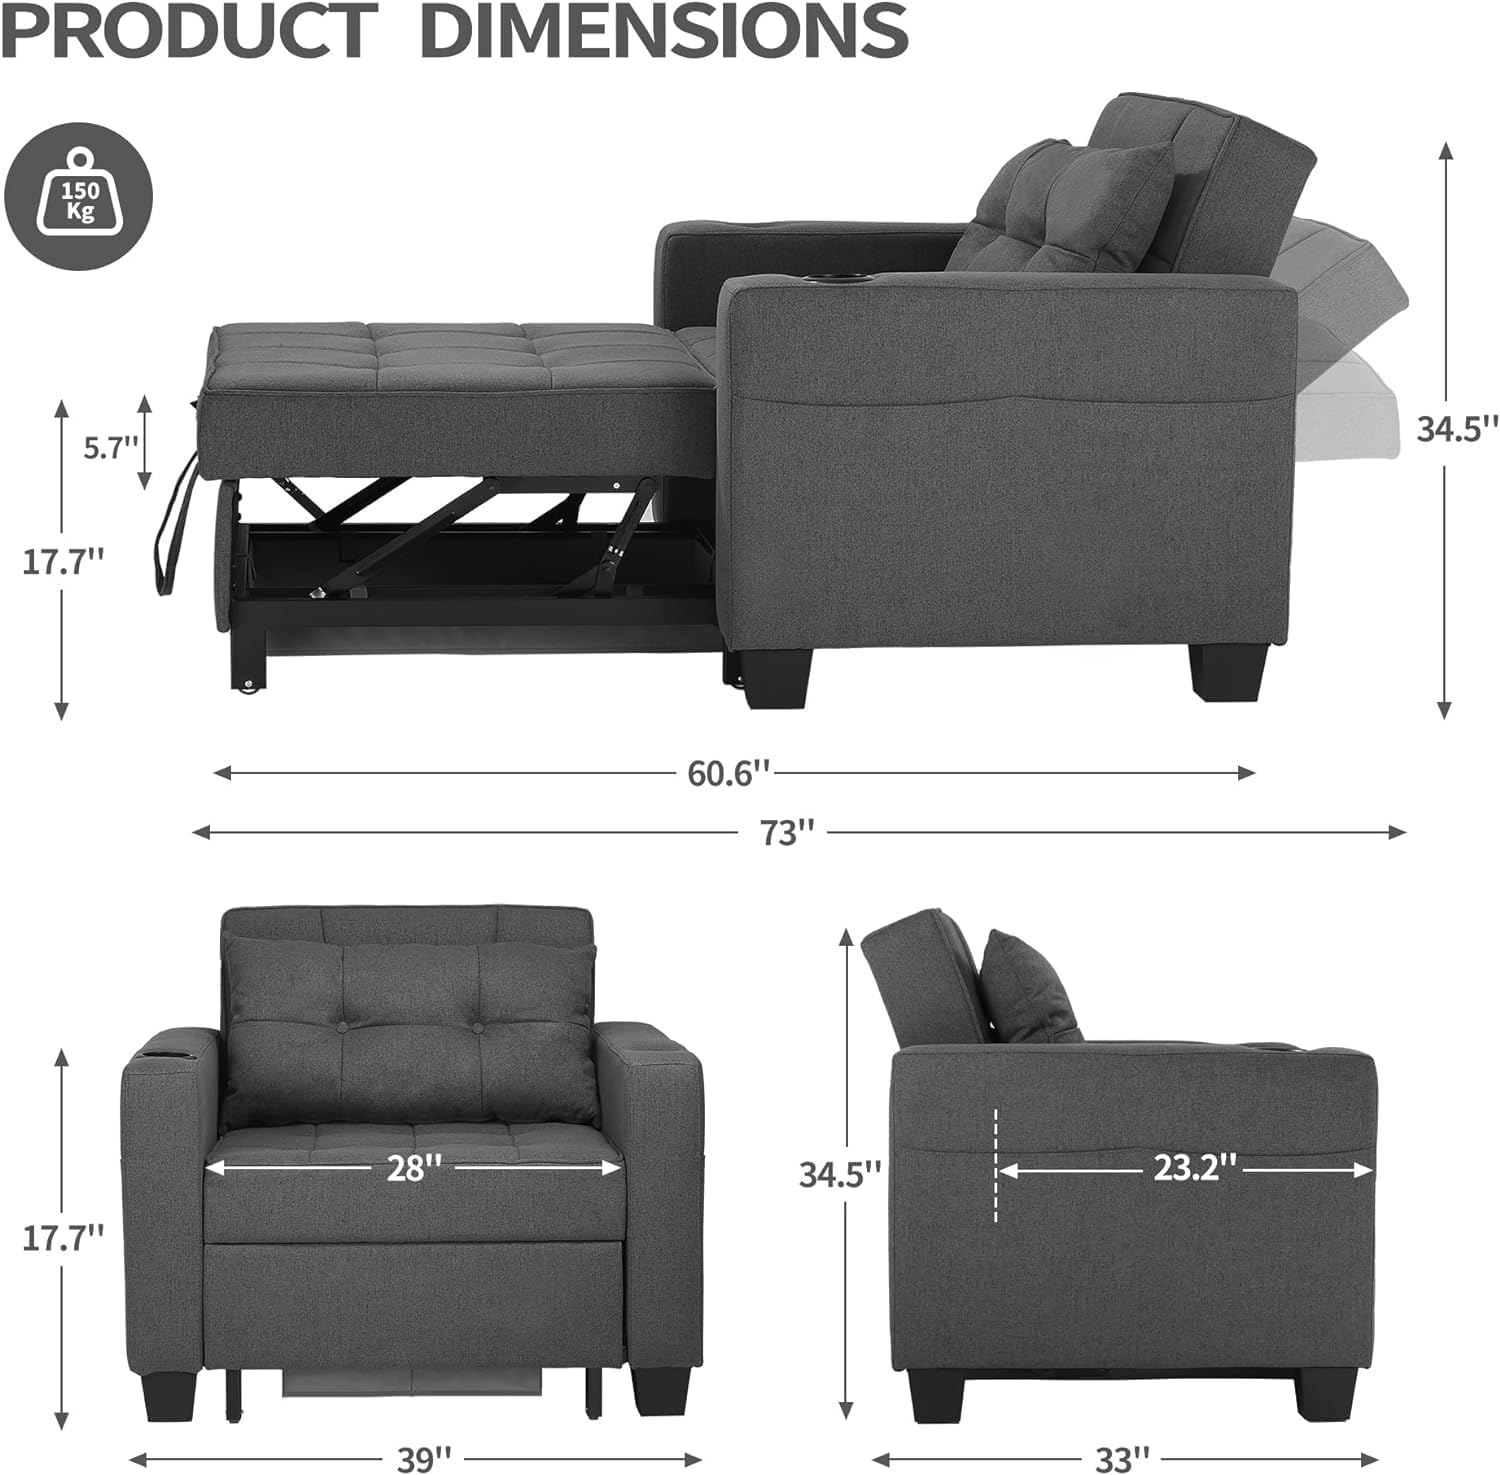 DURASPACE Folding Armchair dimensions and weight limit